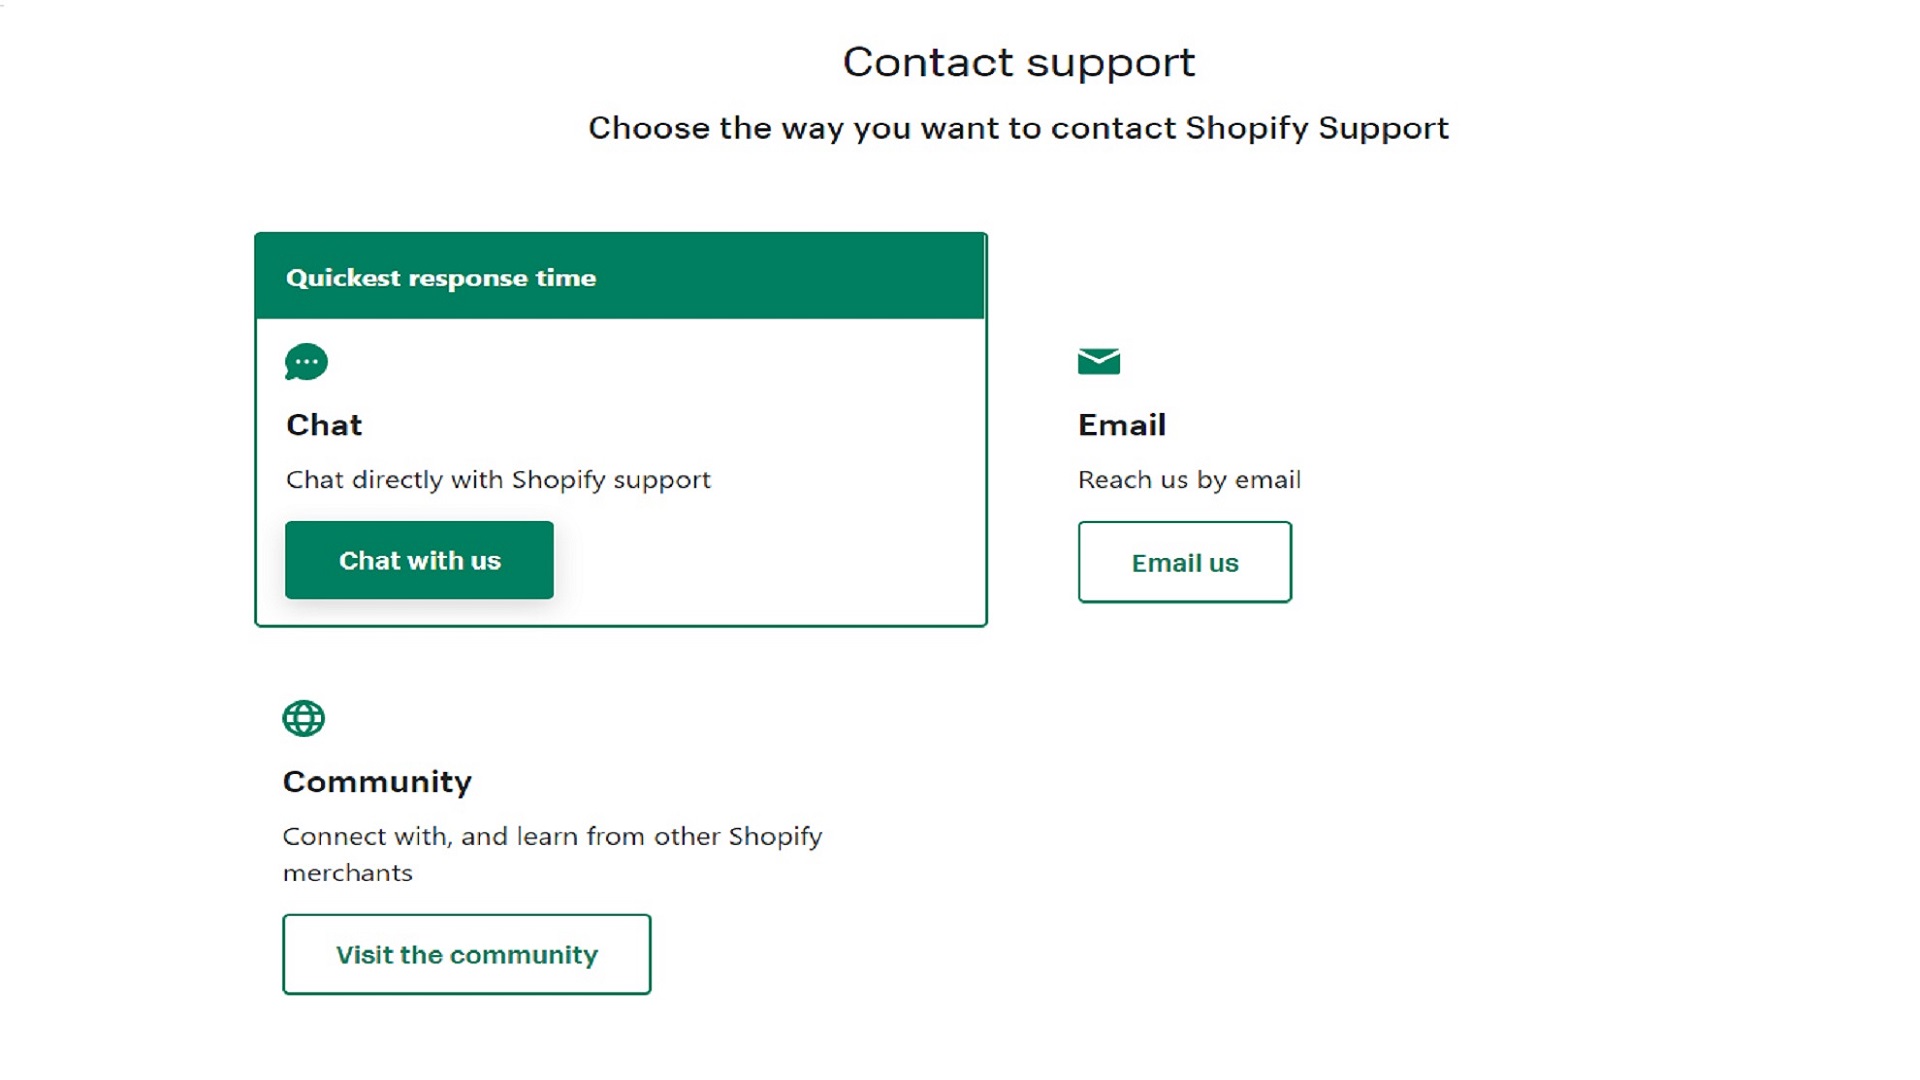 Shopify contact support page